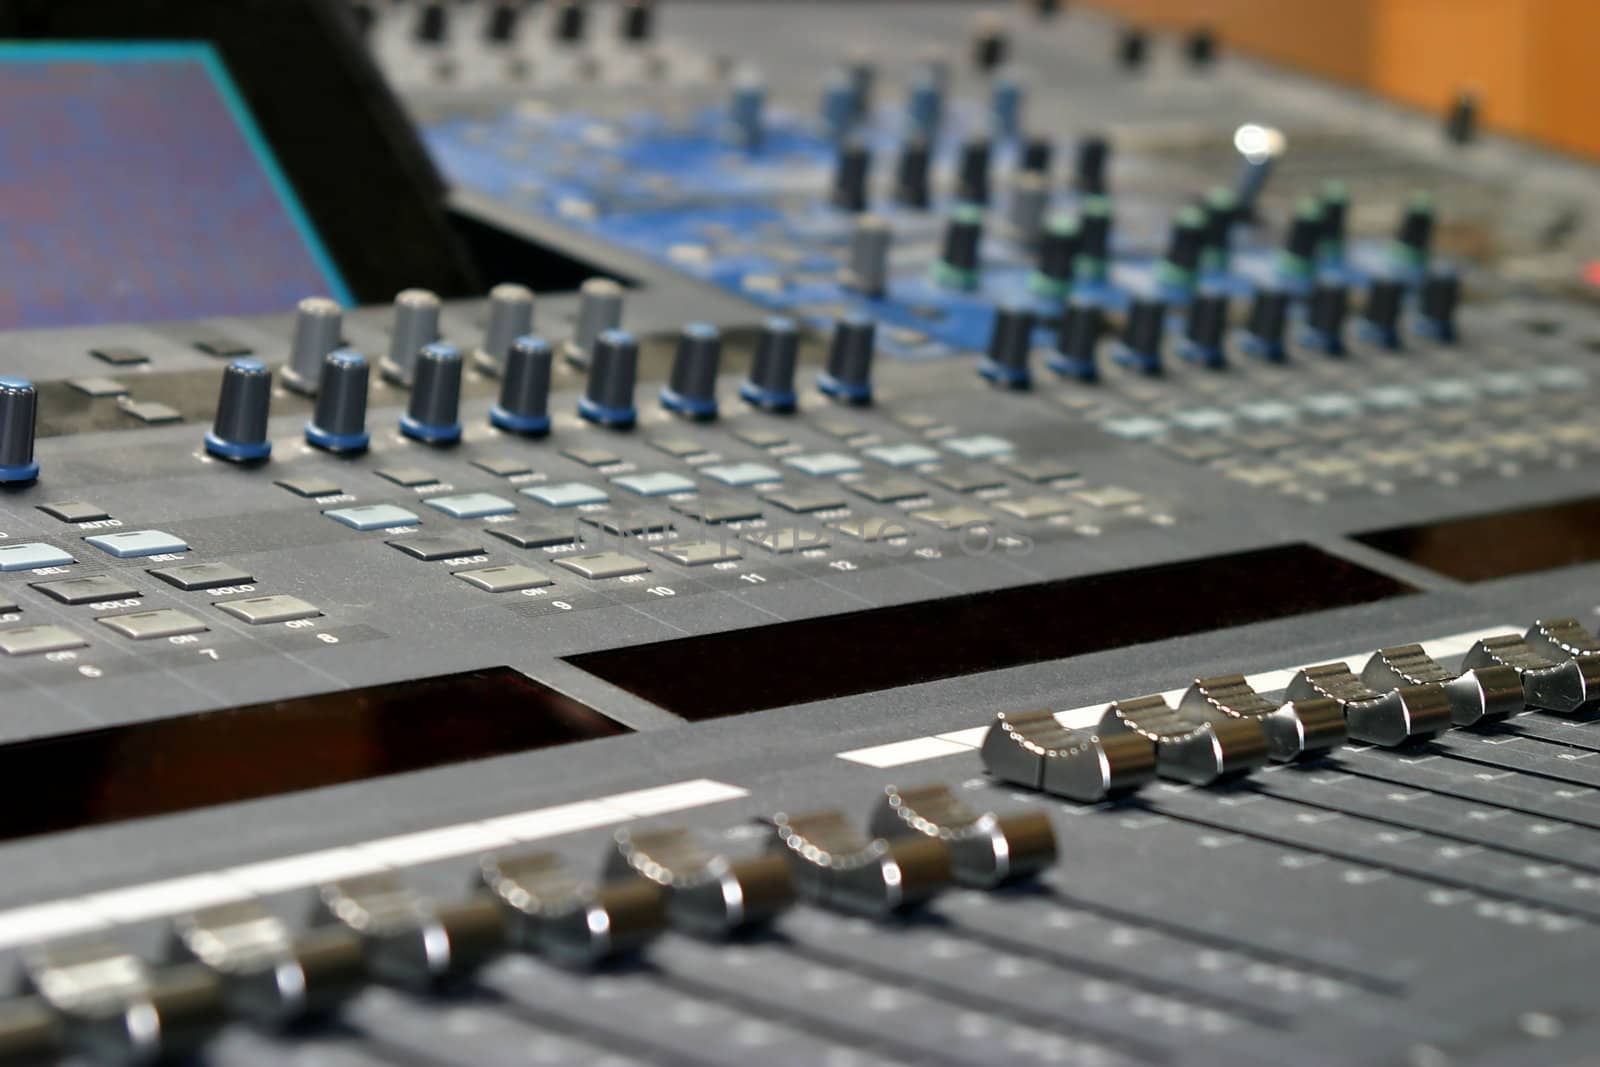 Top view of a mixing console in a music studio